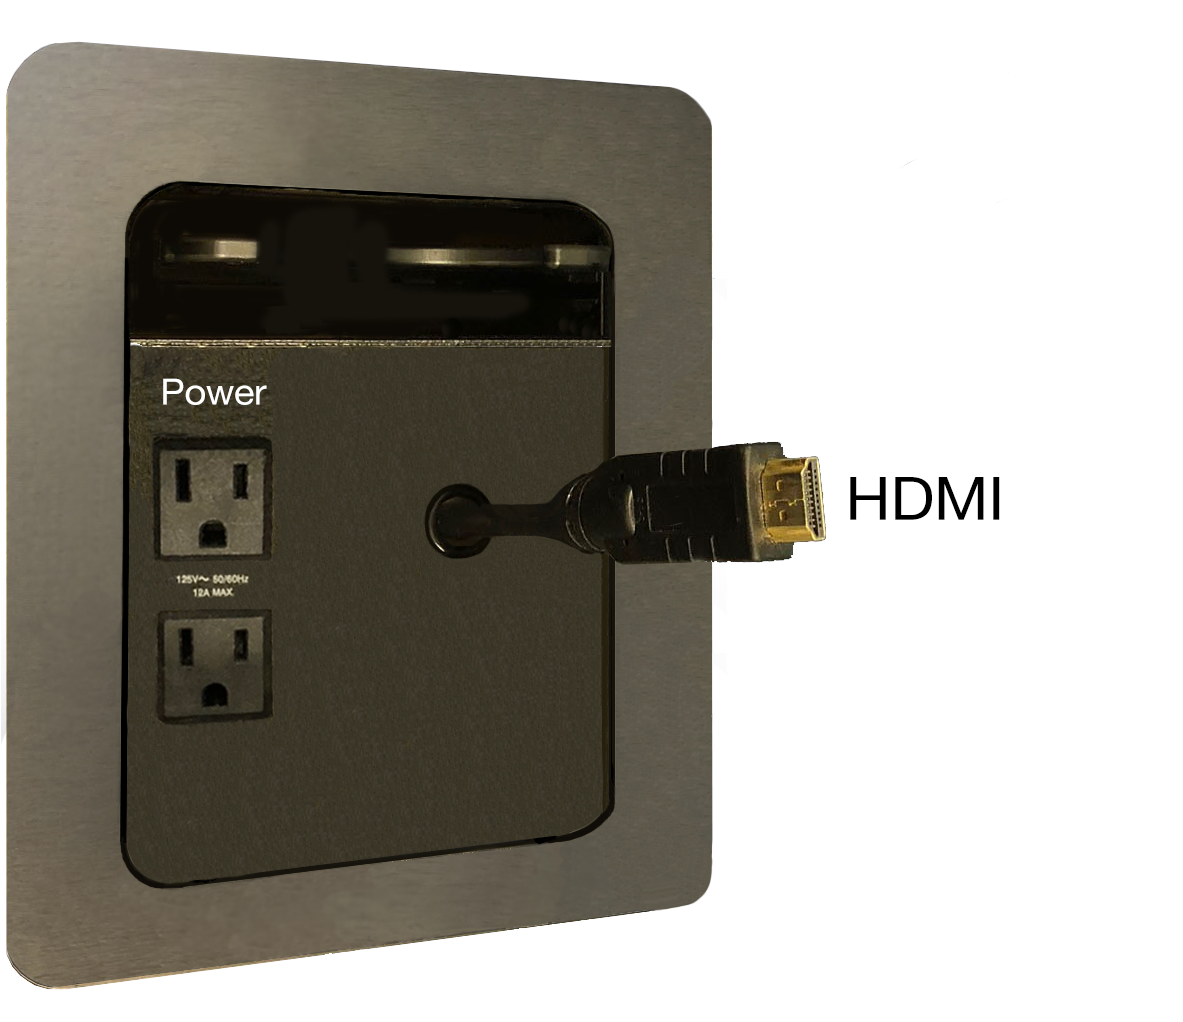 Image of HD input panel with HDMI cable and Power outlets shown